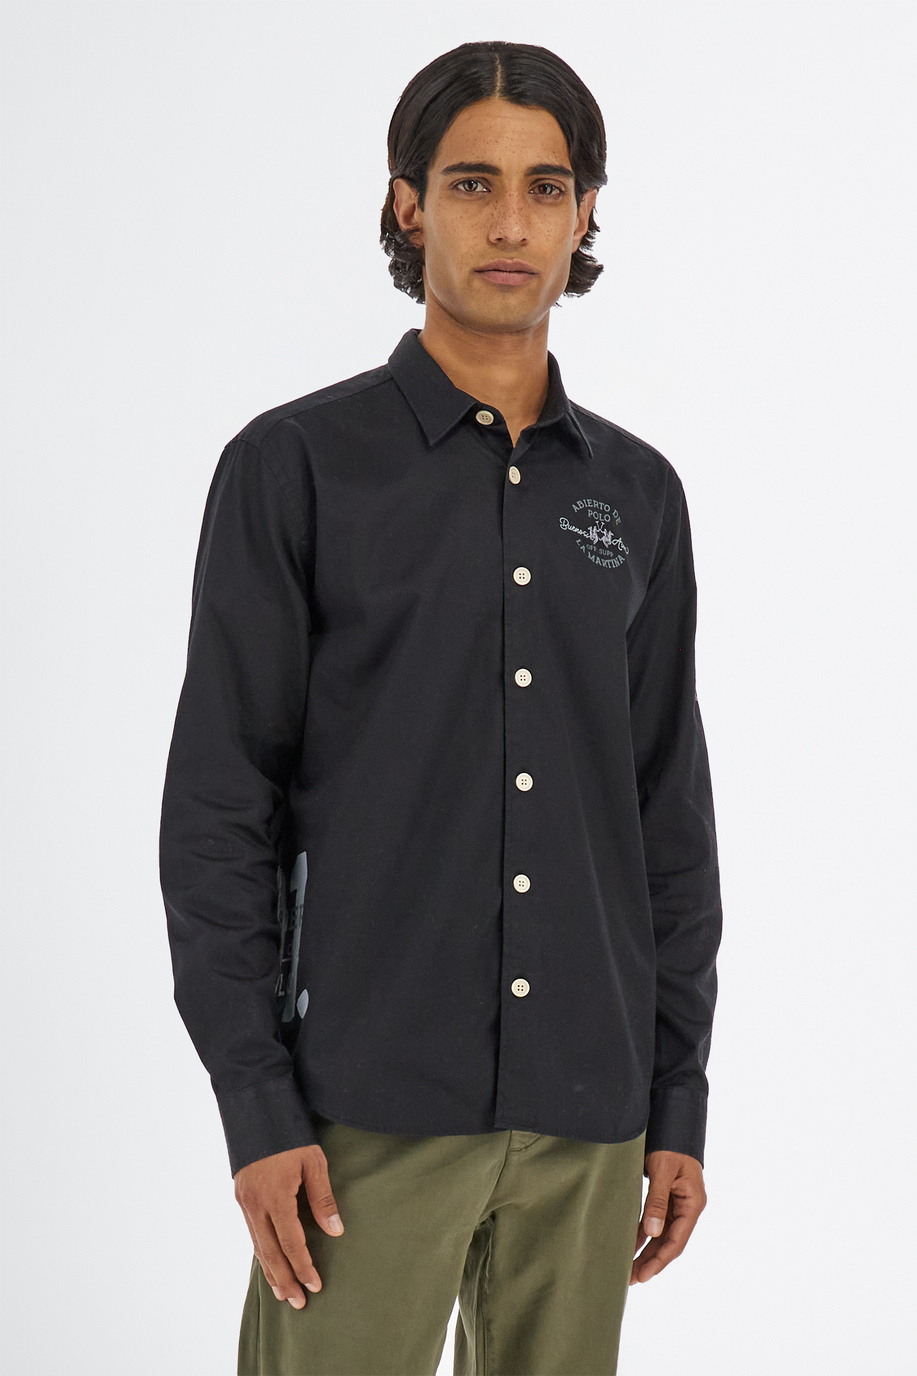 Leyendas Del Polo men’s shirt with long sleeves in regular fit twill cotton - Shirts | La Martina - Official Online Shop